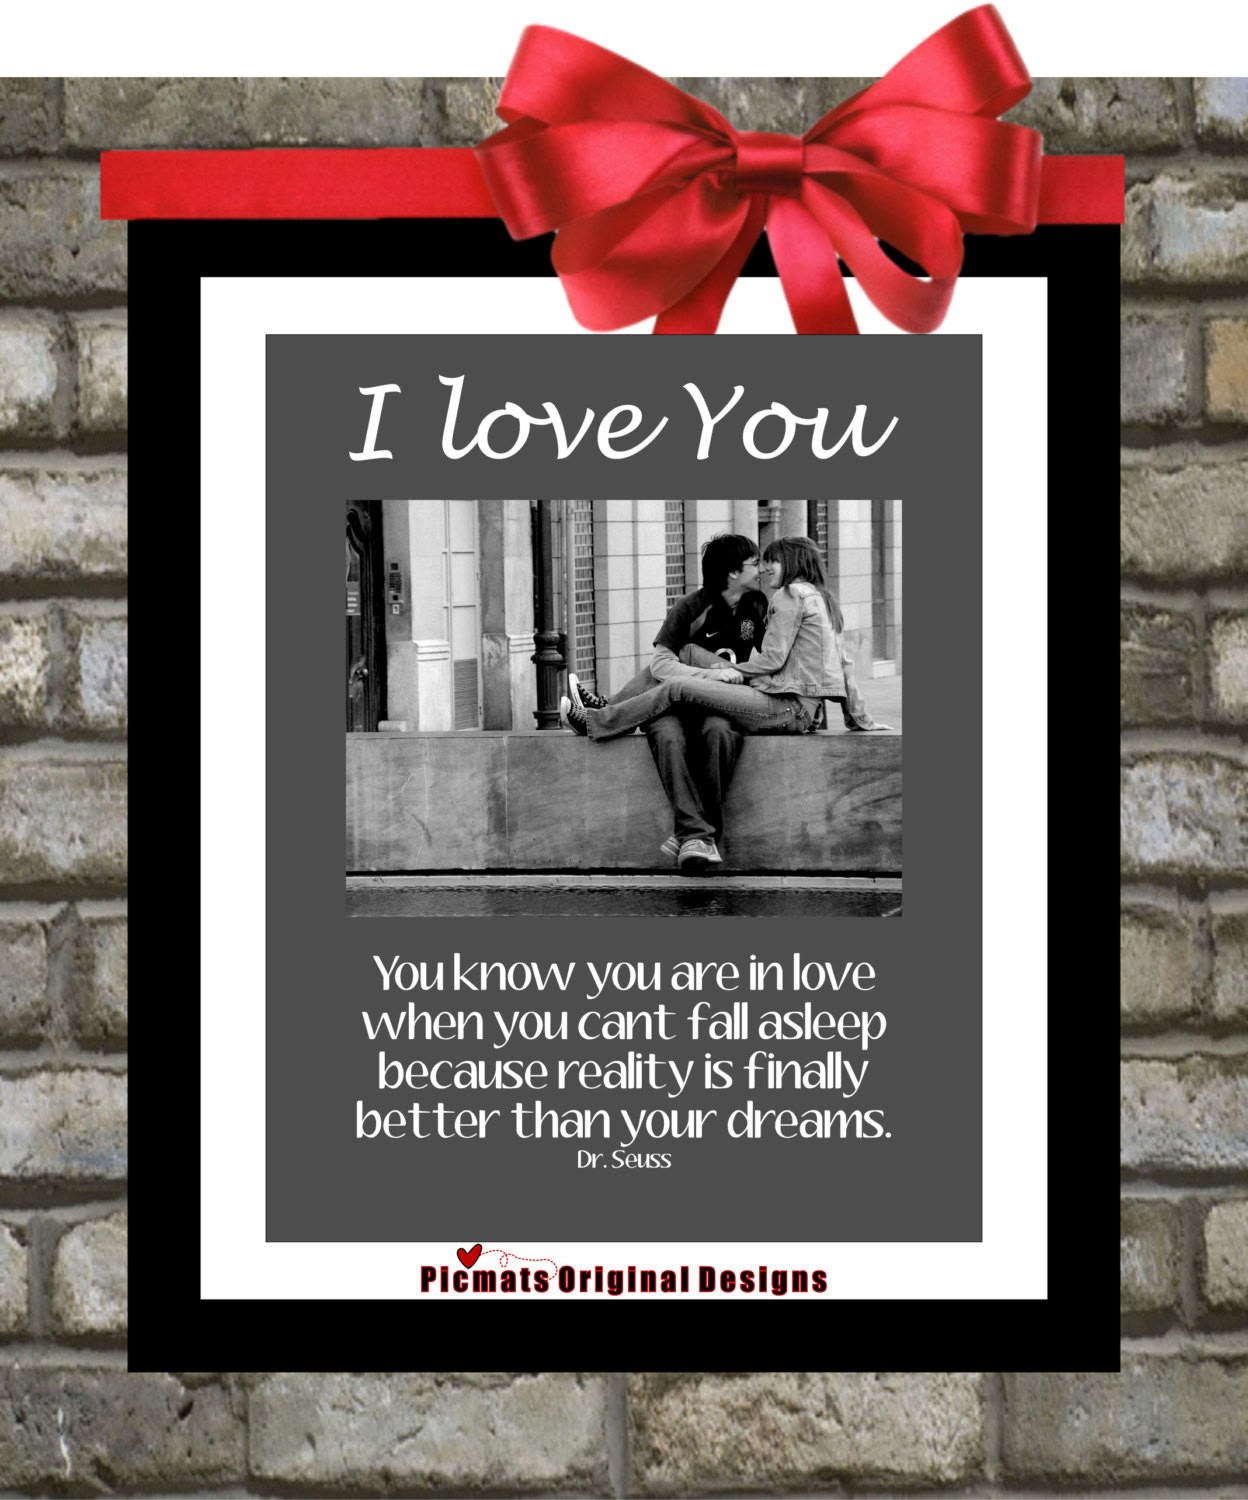 Personalized Gift Ideas For Boyfriend
 Valentine Personalized Gift 6416